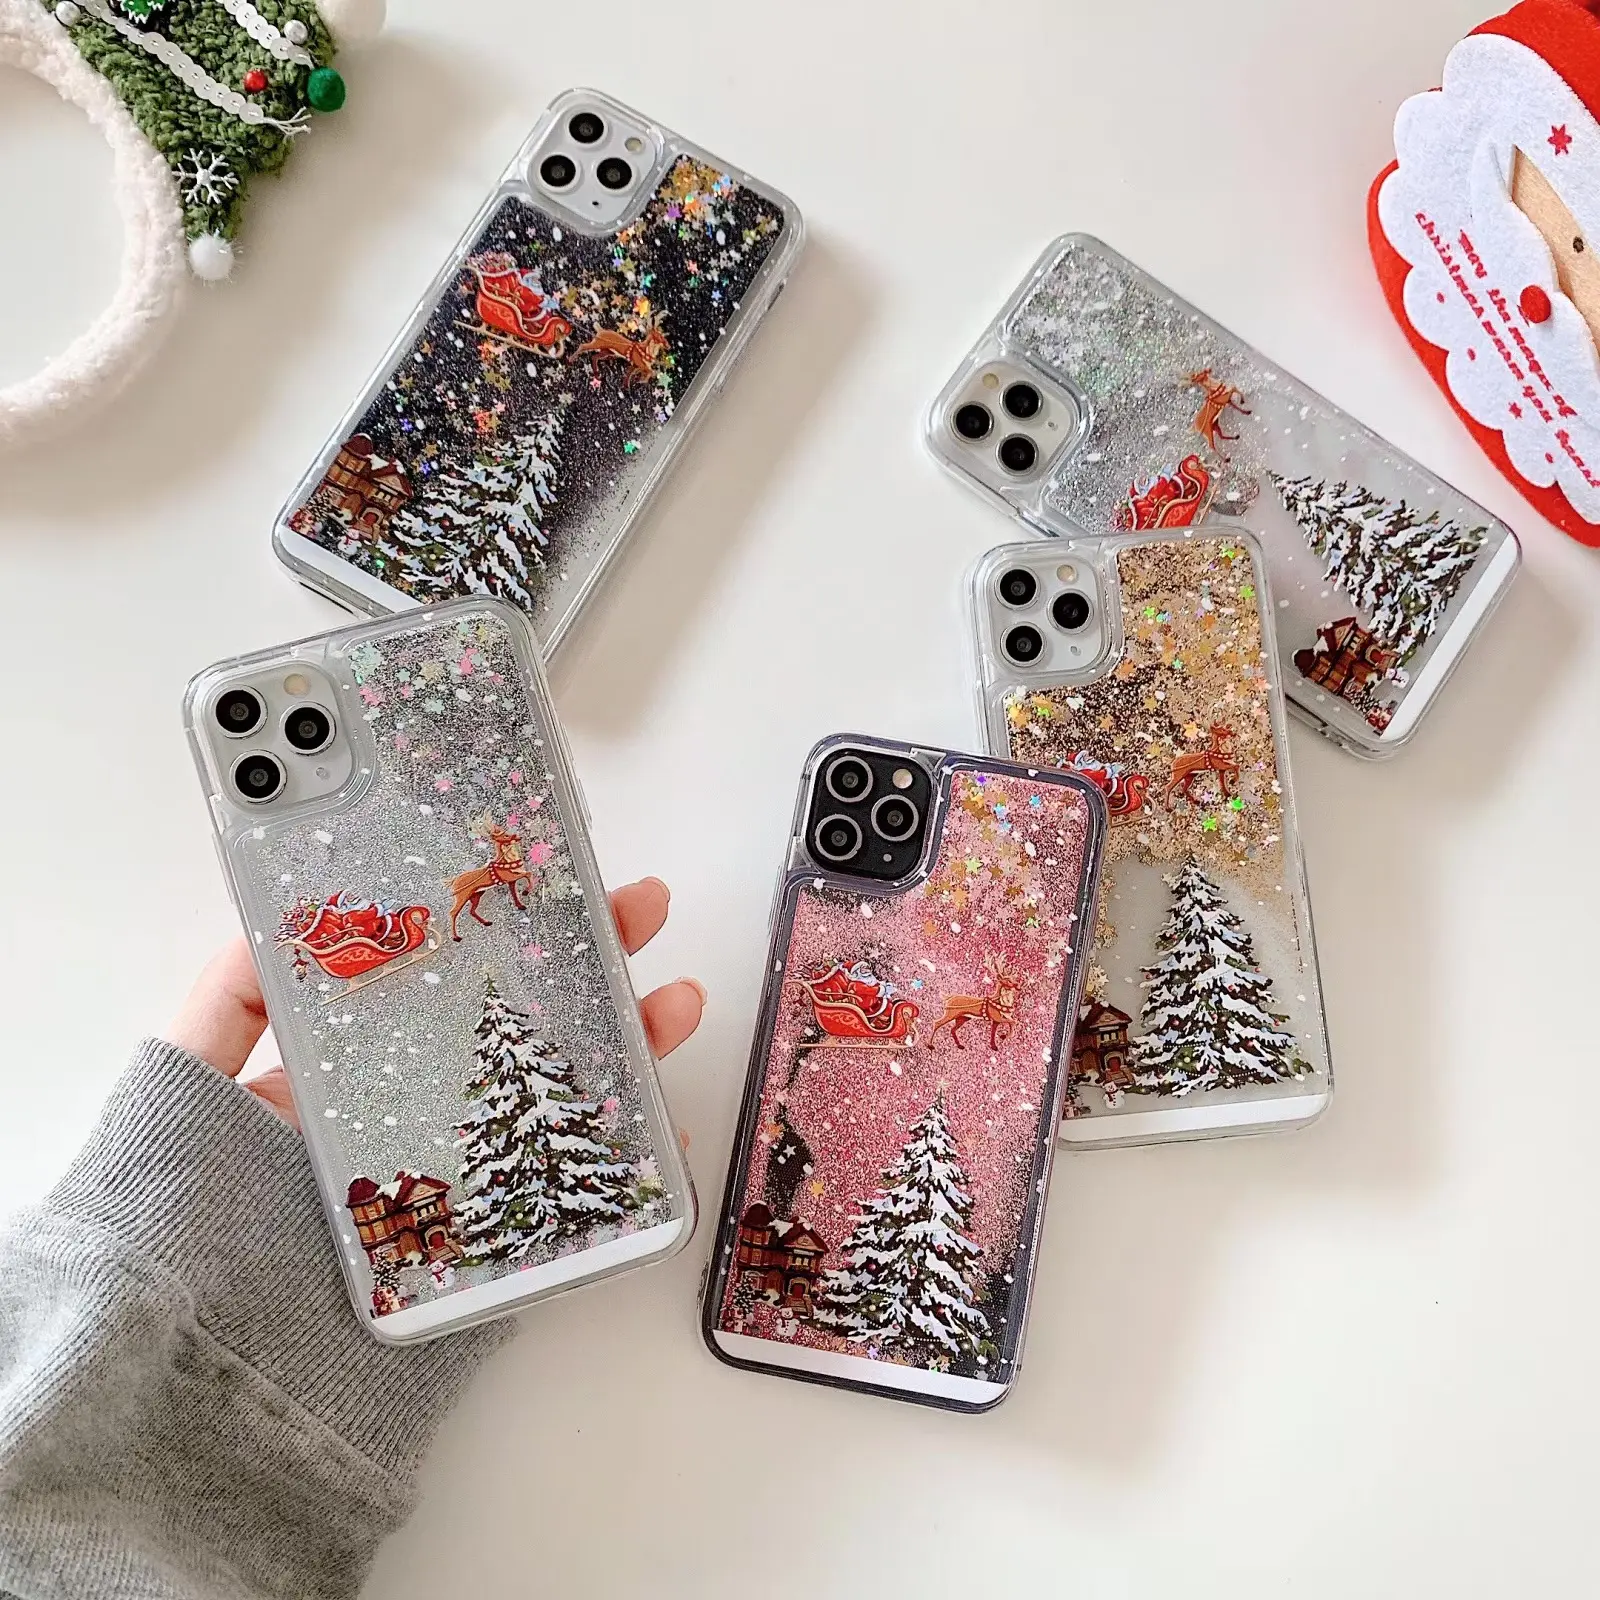 Merry Christmas Dynamic Quicksand Glitter Xmas Phone Case Cute Cases For iPhone online data typing jobs from home